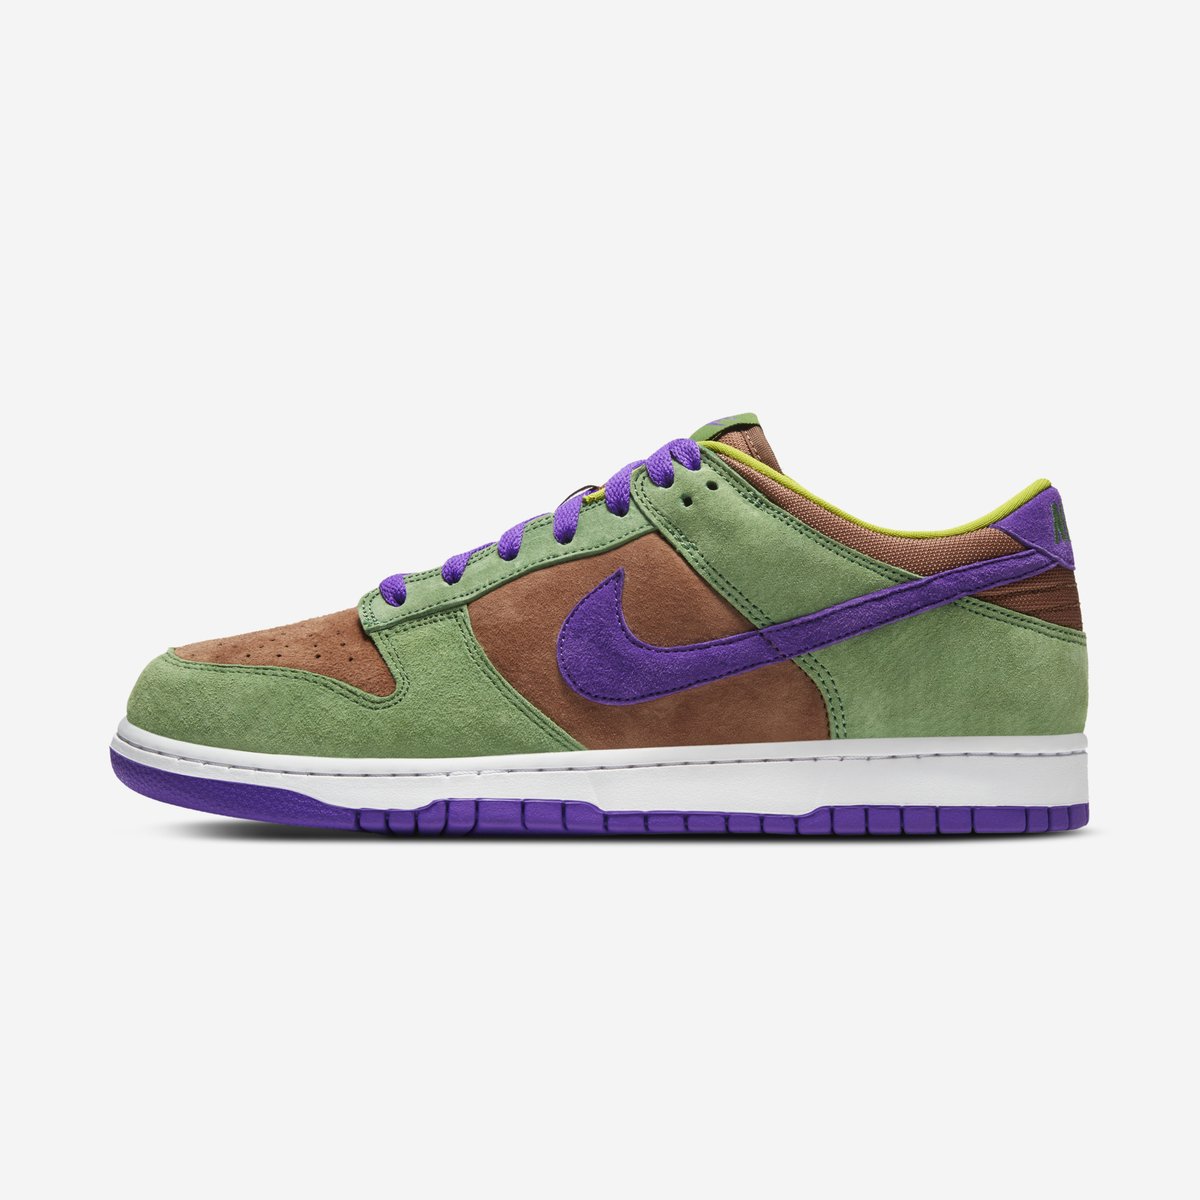 Ad: Nike Dunk Low Veneer on sale 15% OFF
Use code 'EXTRAQ15' for a 15% discount 👇🏻
🇷🇴 QNS RO: u.sneakermarket.ro/bdz82jfm
🇪🇺 QNS EU: u.sneakermarket.ro/yck7a99j
🇳🇱 QNS NL: u.sneakermarket.ro/ym23mrb2
🇩🇪 QNS DE: u.sneakermarket.ro/2p9dz7p3
🇨🇿 QNS CZ: u.sneakermarket.ro/2p95v77b
🇸🇰 QNS SK: